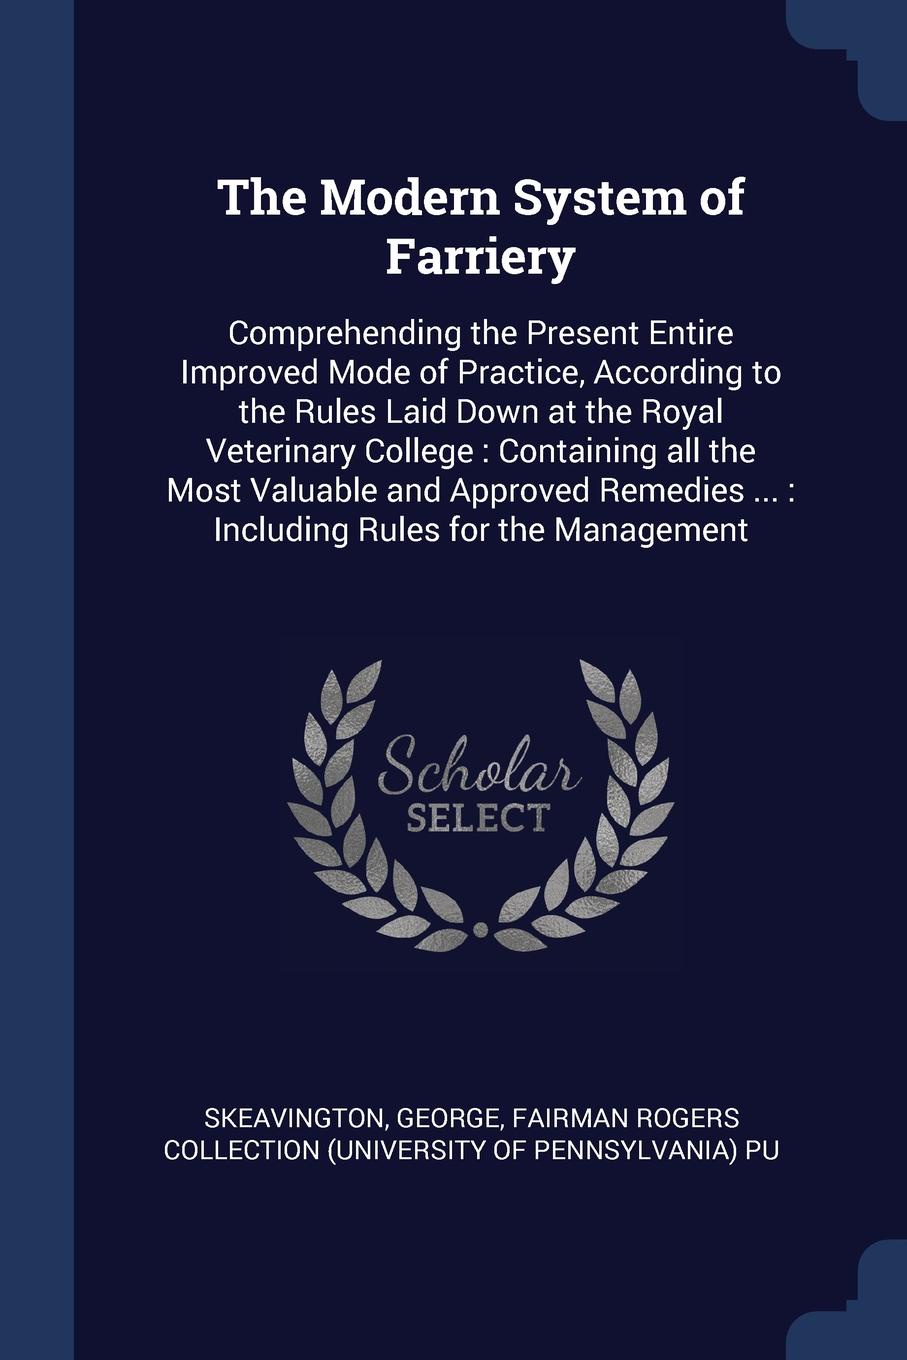 The Modern System of Farriery. Comprehending the Present Entire Improved Mode of Practice, According to the Rules Laid Down at the Royal Veterinary College : Containing all the Most Valuable and Approved Remedies ... : Including Rules for the Mana...